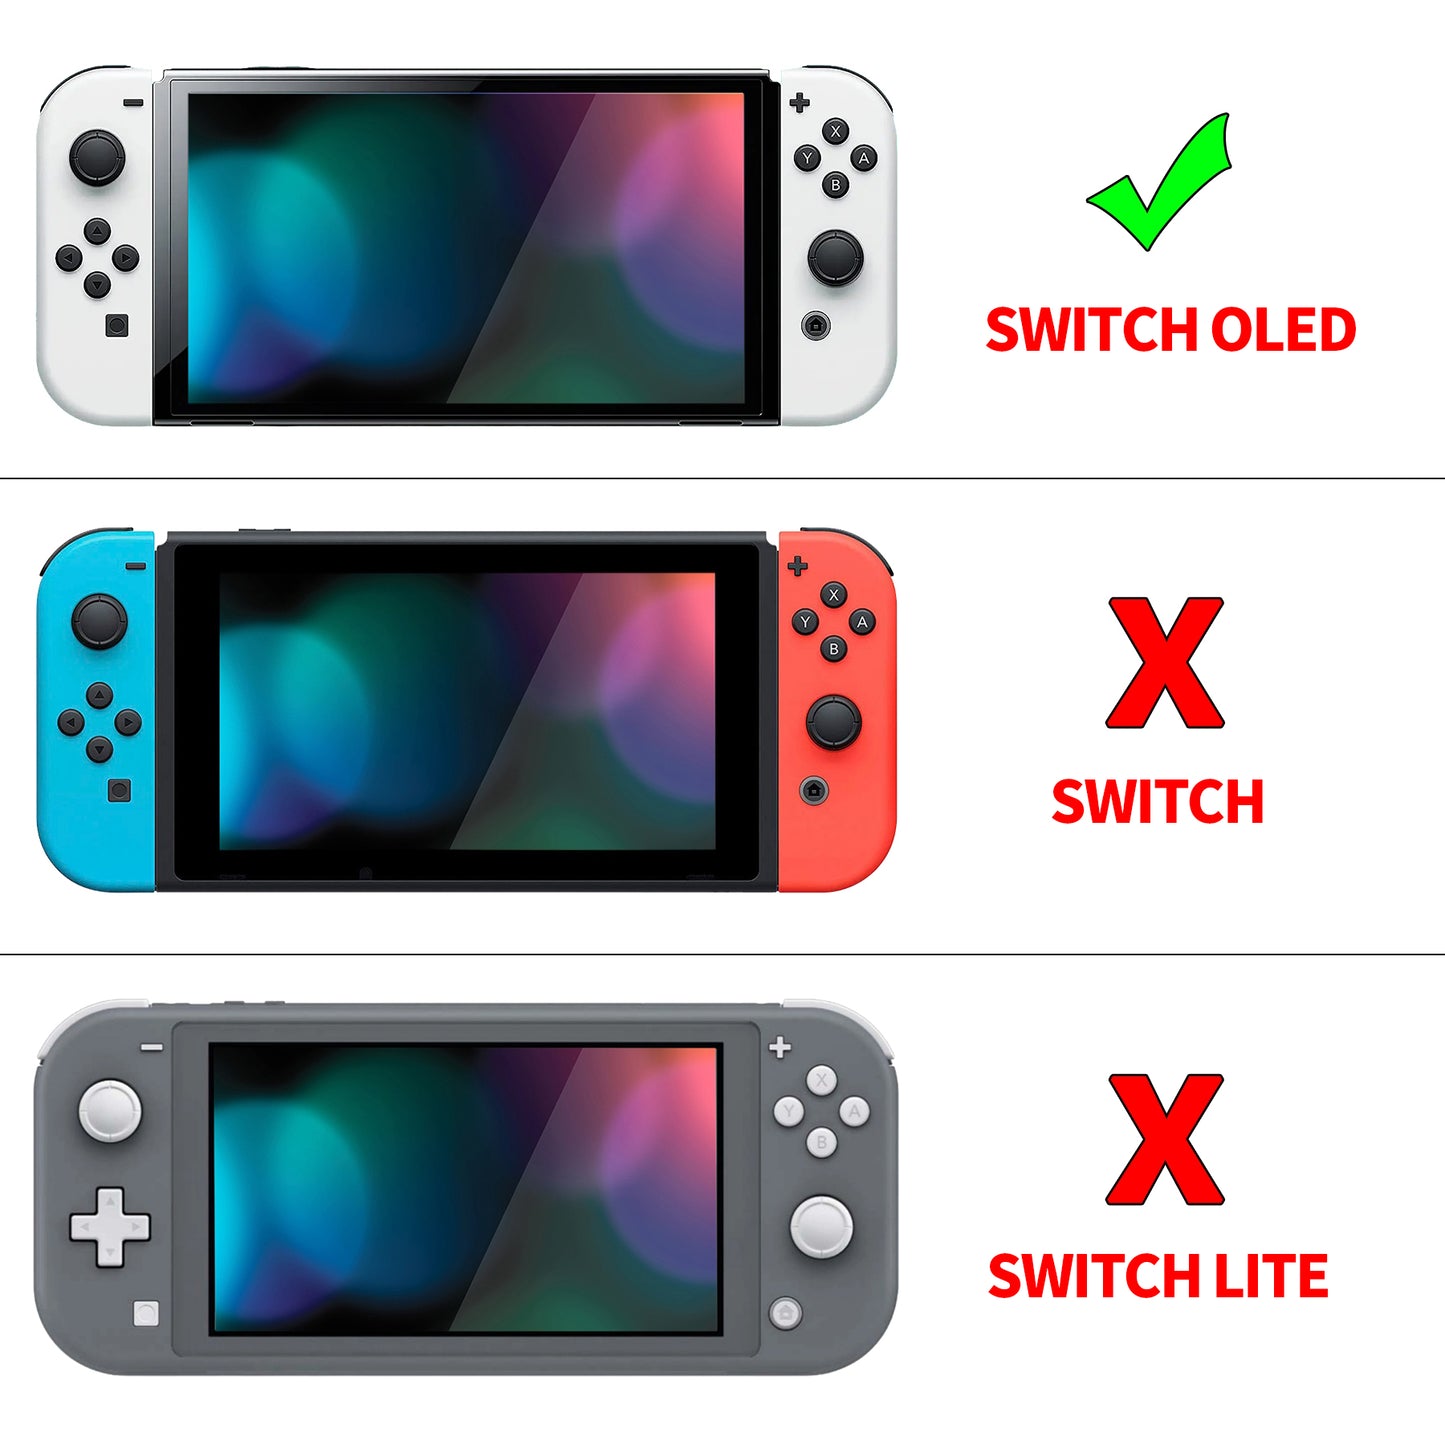 PlayVital ZealProtect Soft Protective Case for Switch OLED, Flexible Protector Joycon Grip Cover for Switch OLED with Thumb Grip Caps & ABXY Direction Button Caps - Blue Flame - XSOYV6003 playvital